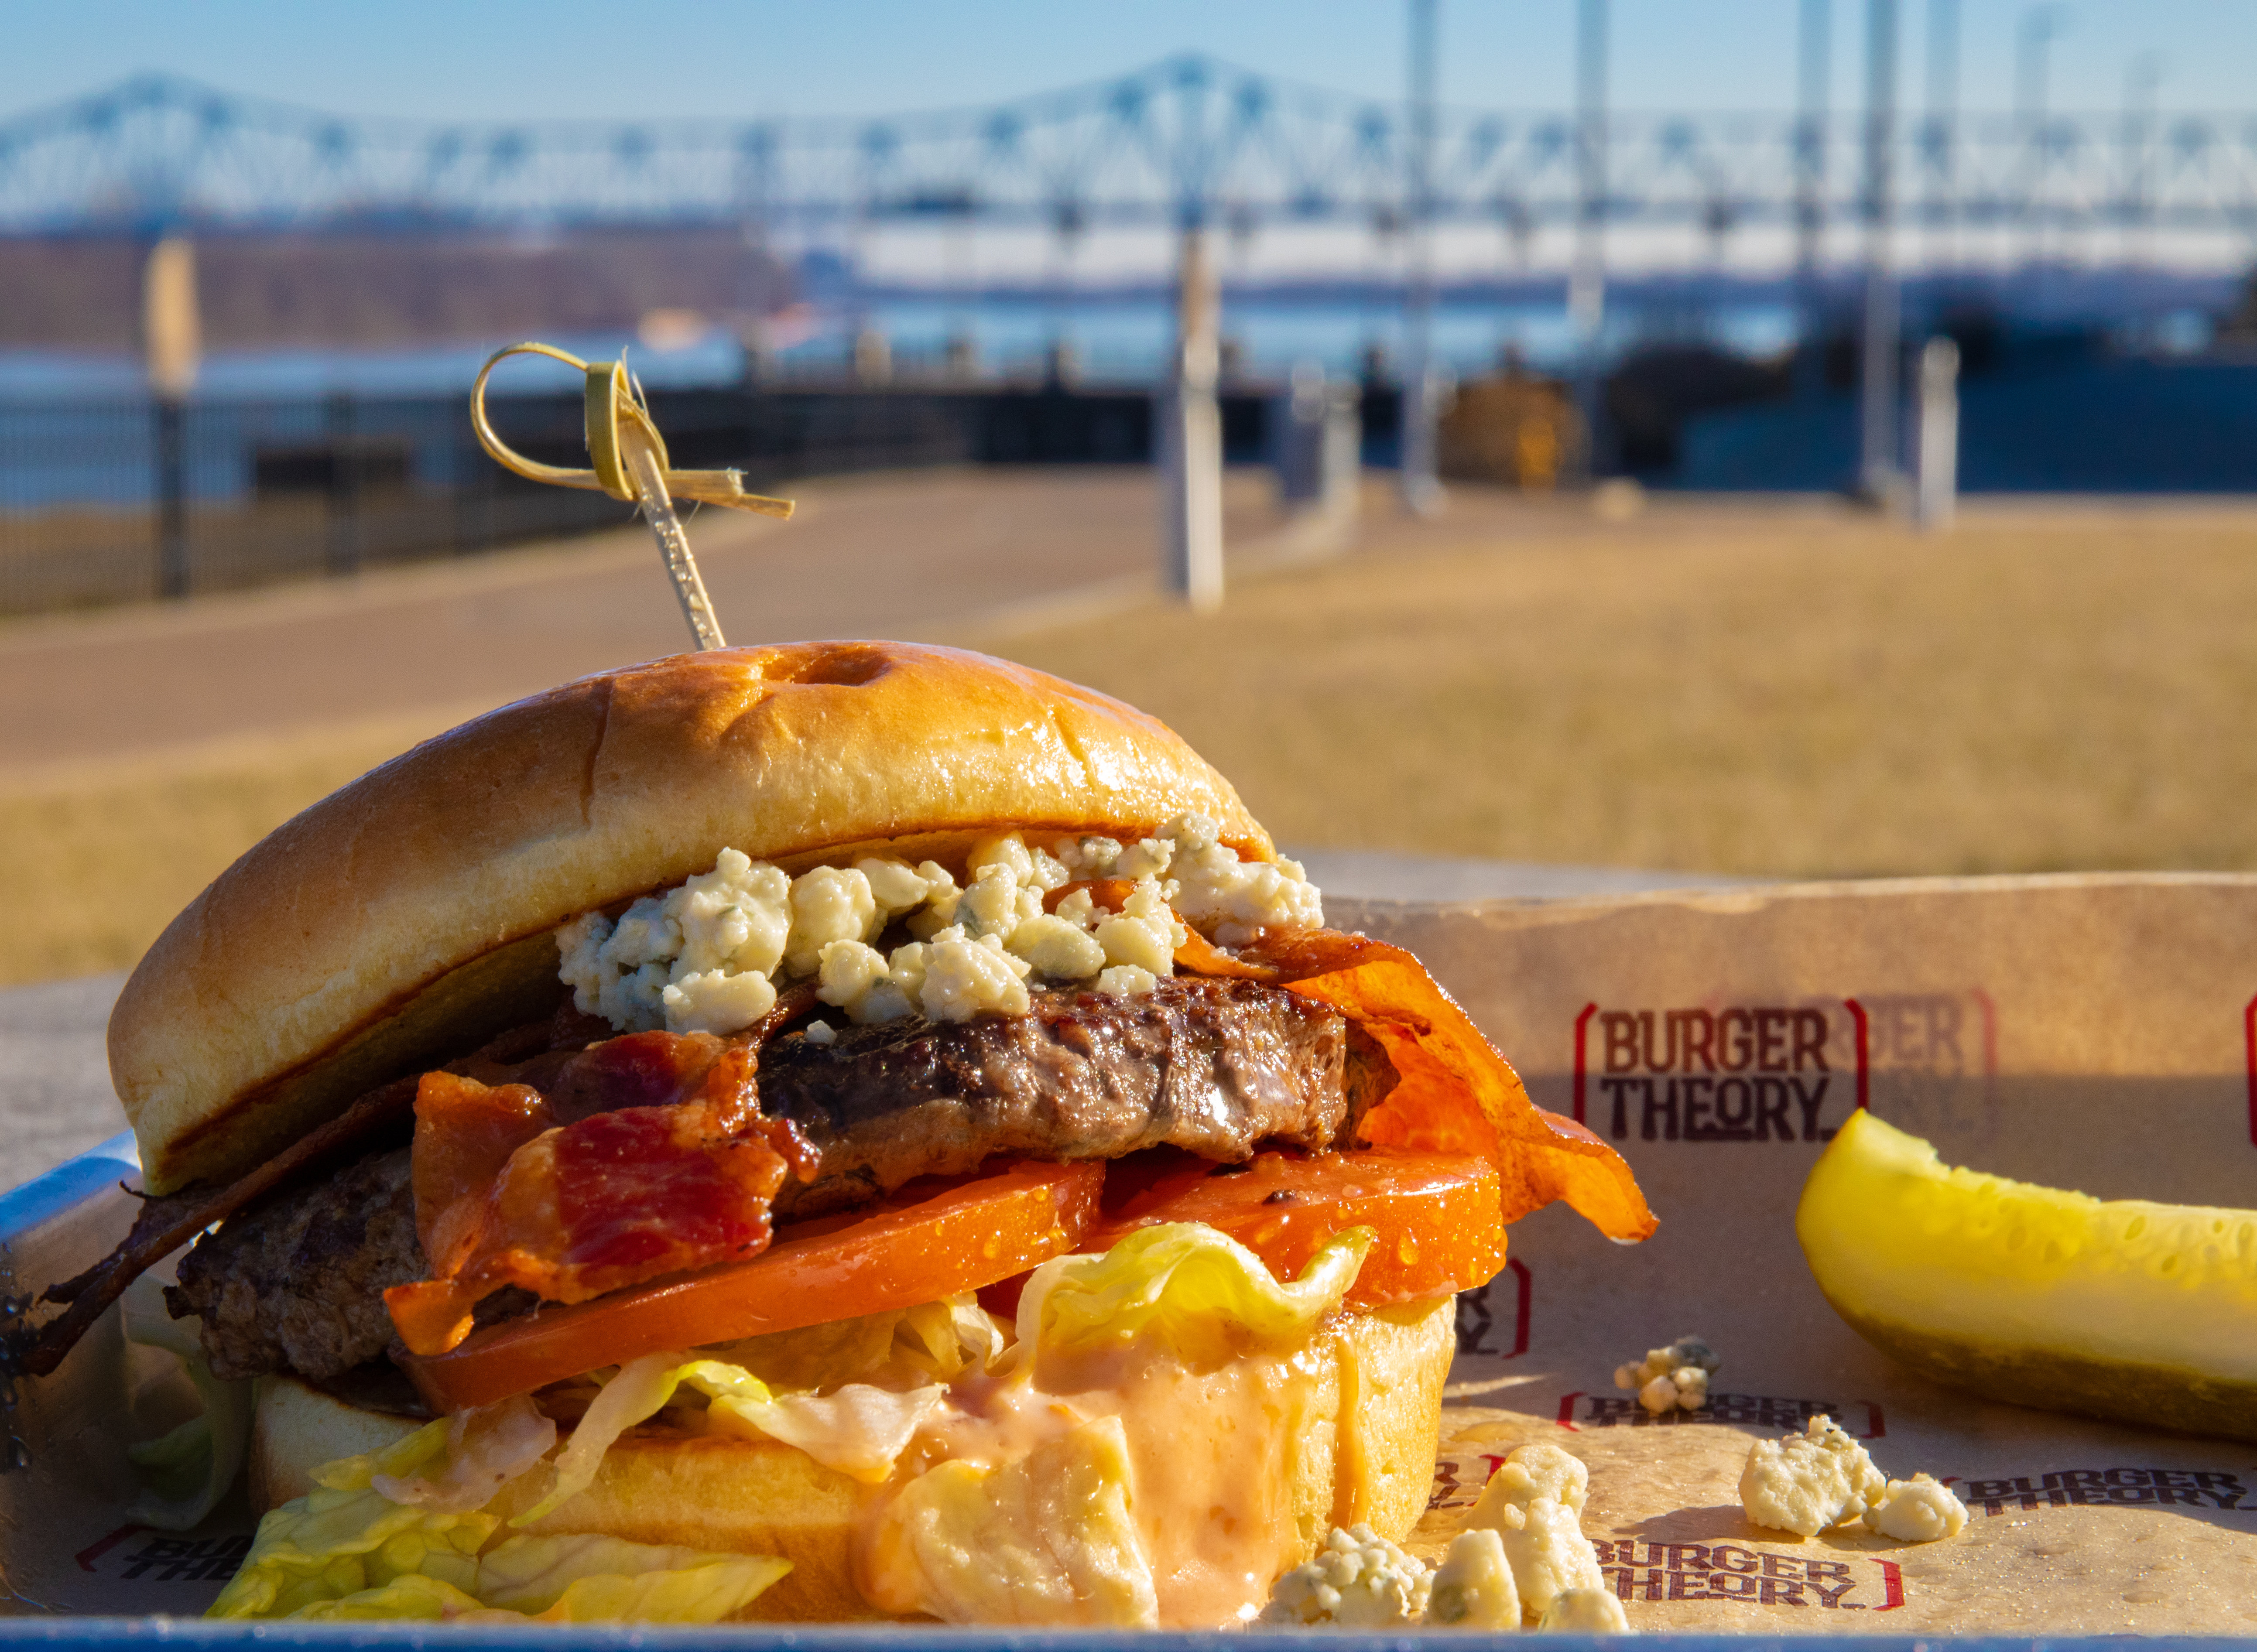 Try a hand crafted burger made from Certified Angus Beef